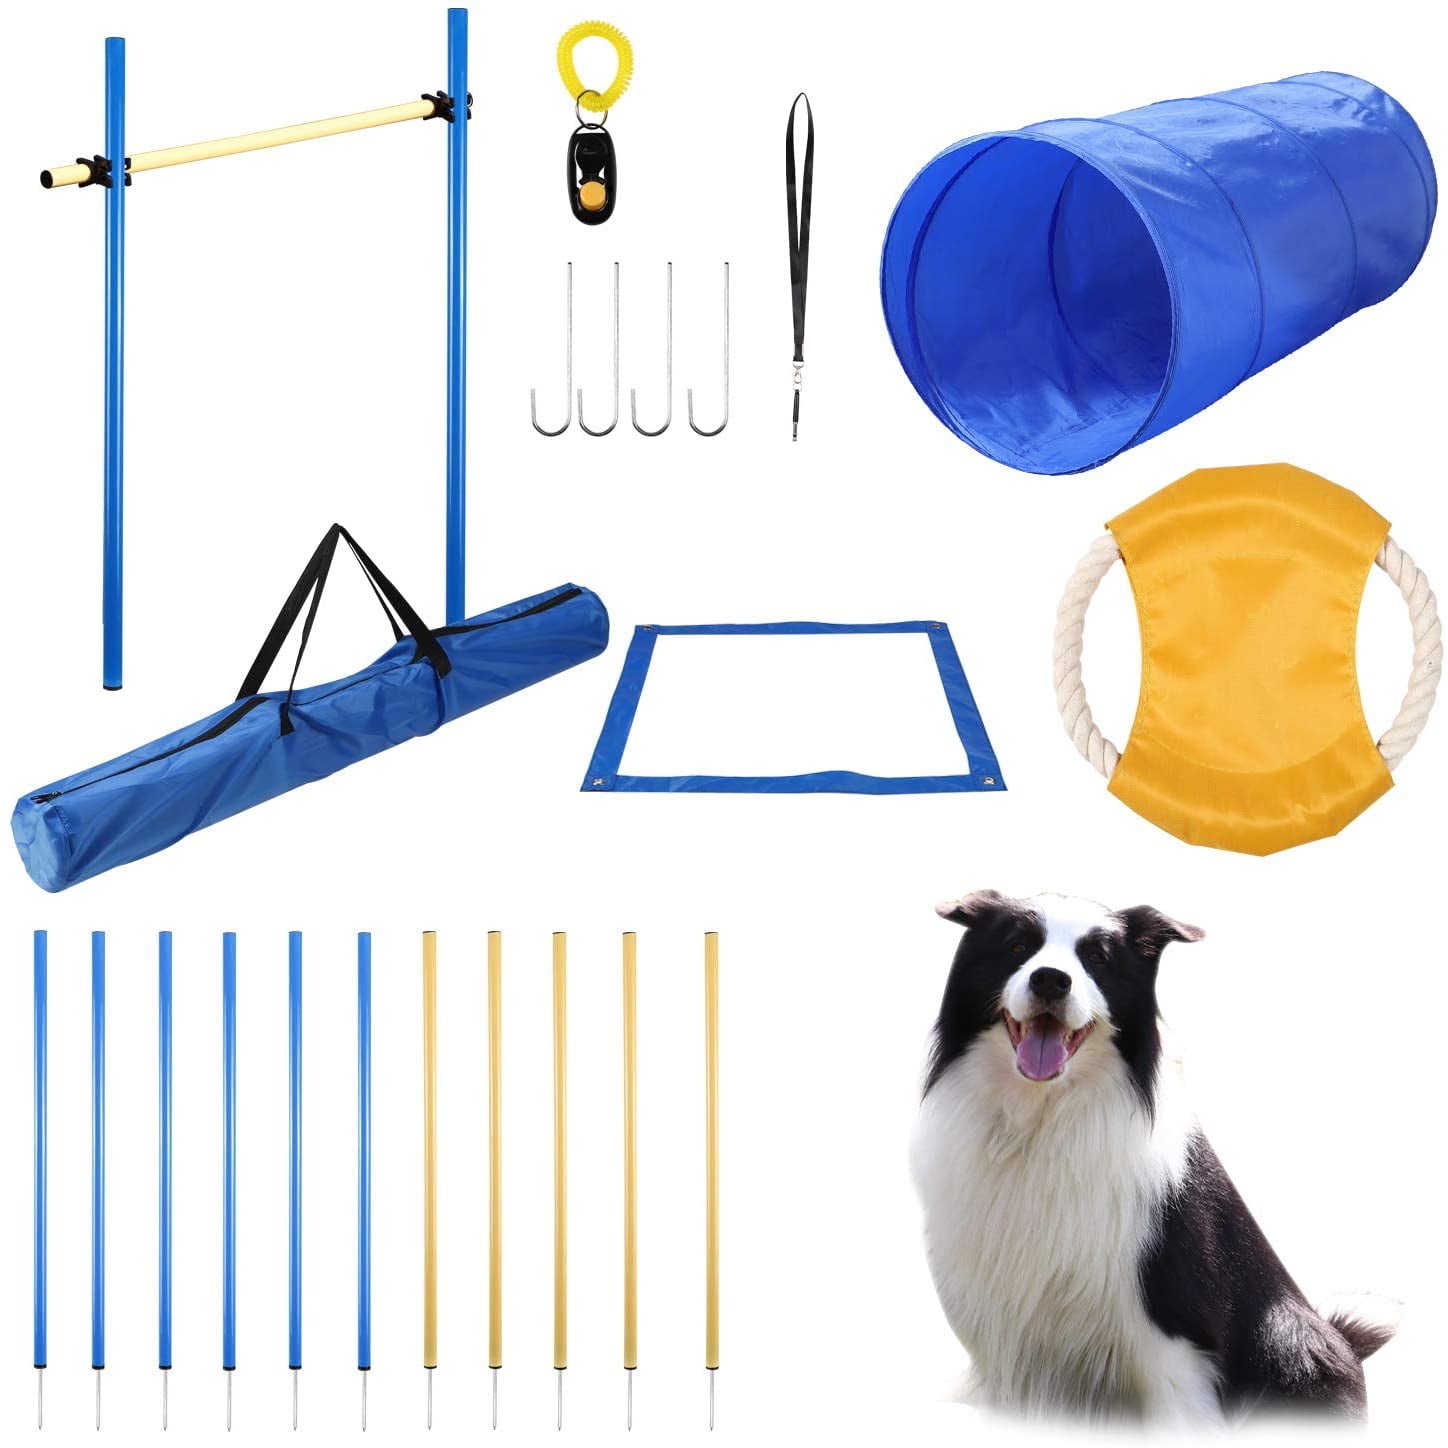 GeerDuo Dog Agility Training Equipment Pause Box and Carrying Bag 8 Weave Poles Pet Outdoor Games Including Tunnel Jump Ring Obstacle Agility Training Starter Kit for Doggie Adjustable Hurdle